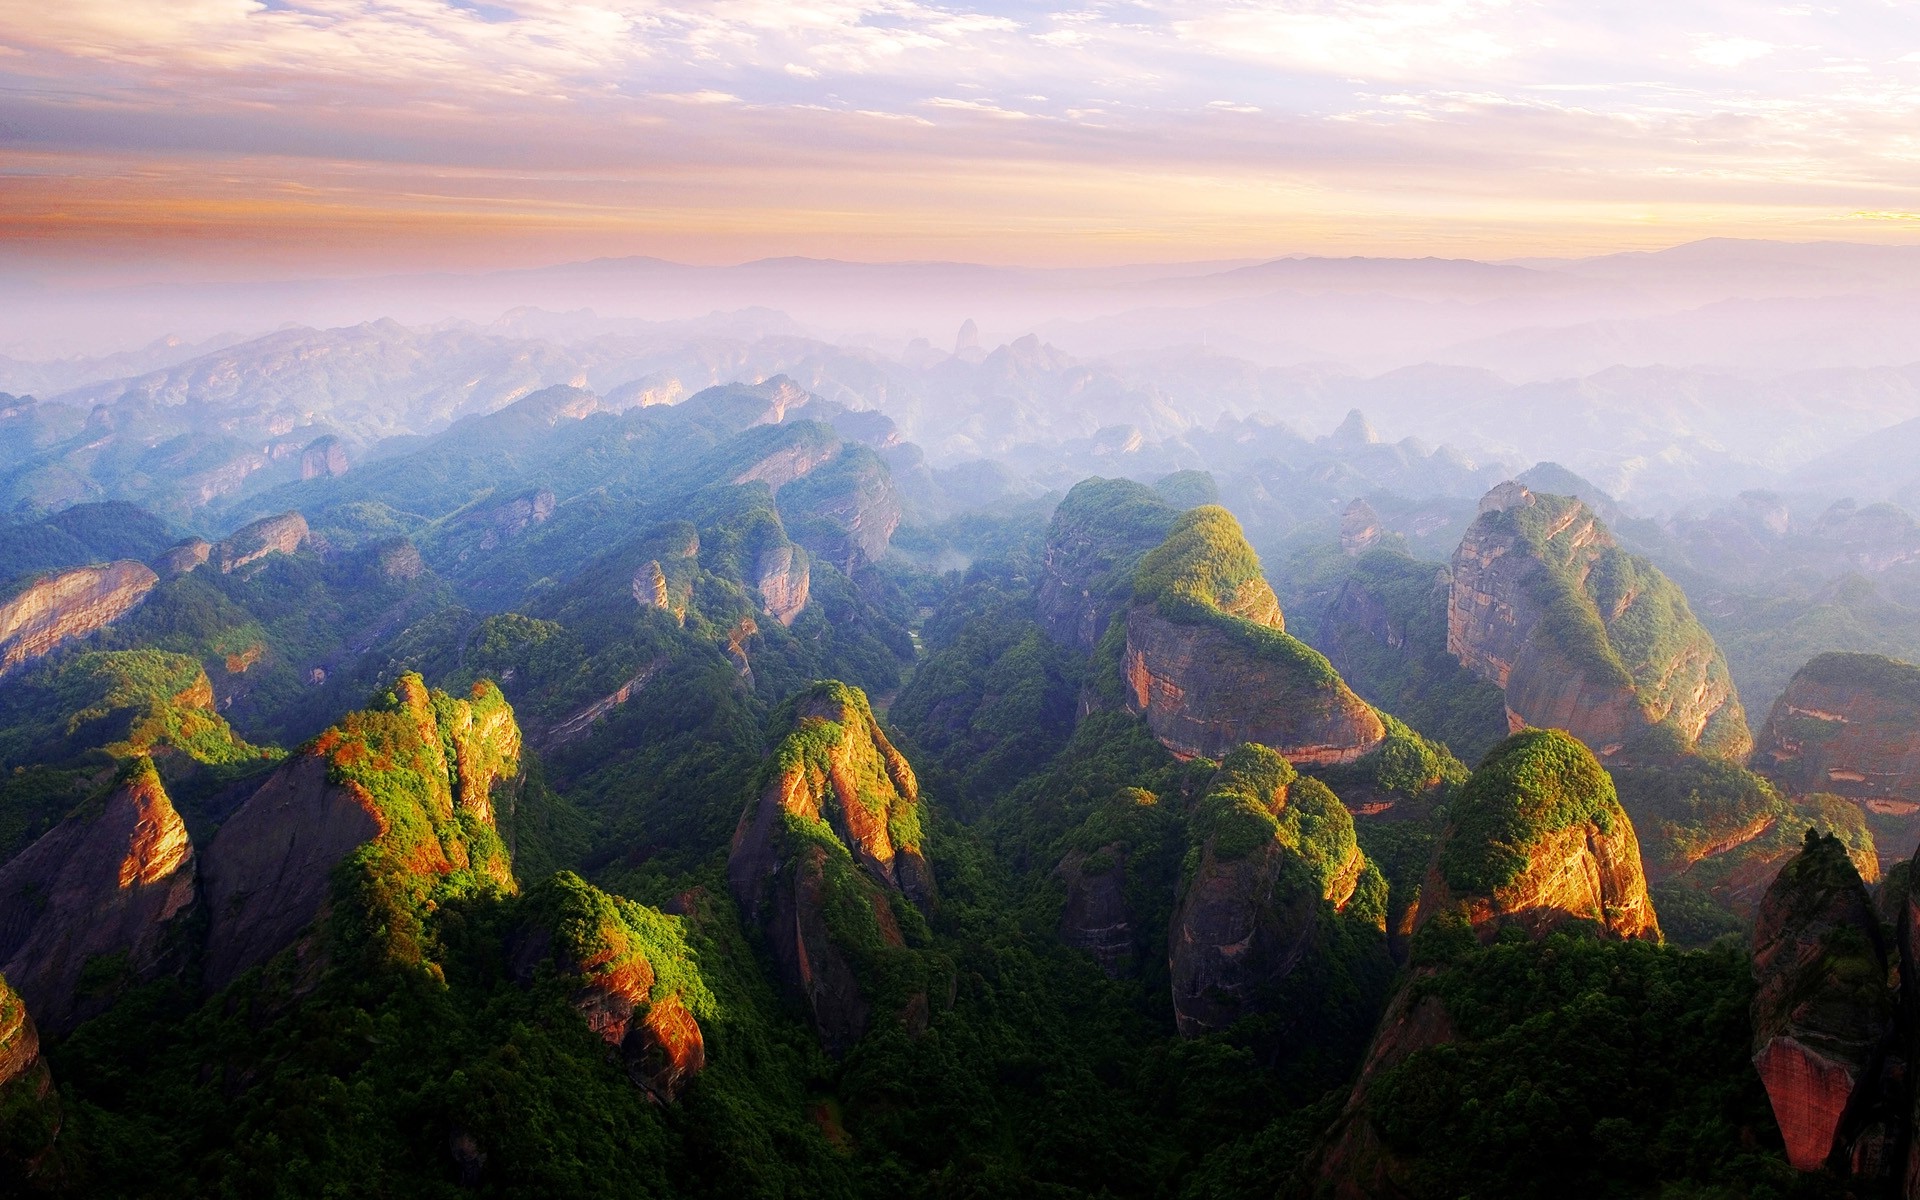 sunset, Mountain, China, Mist, Clouds, Forest, Cliff, Nature, Landscape Wallpaper